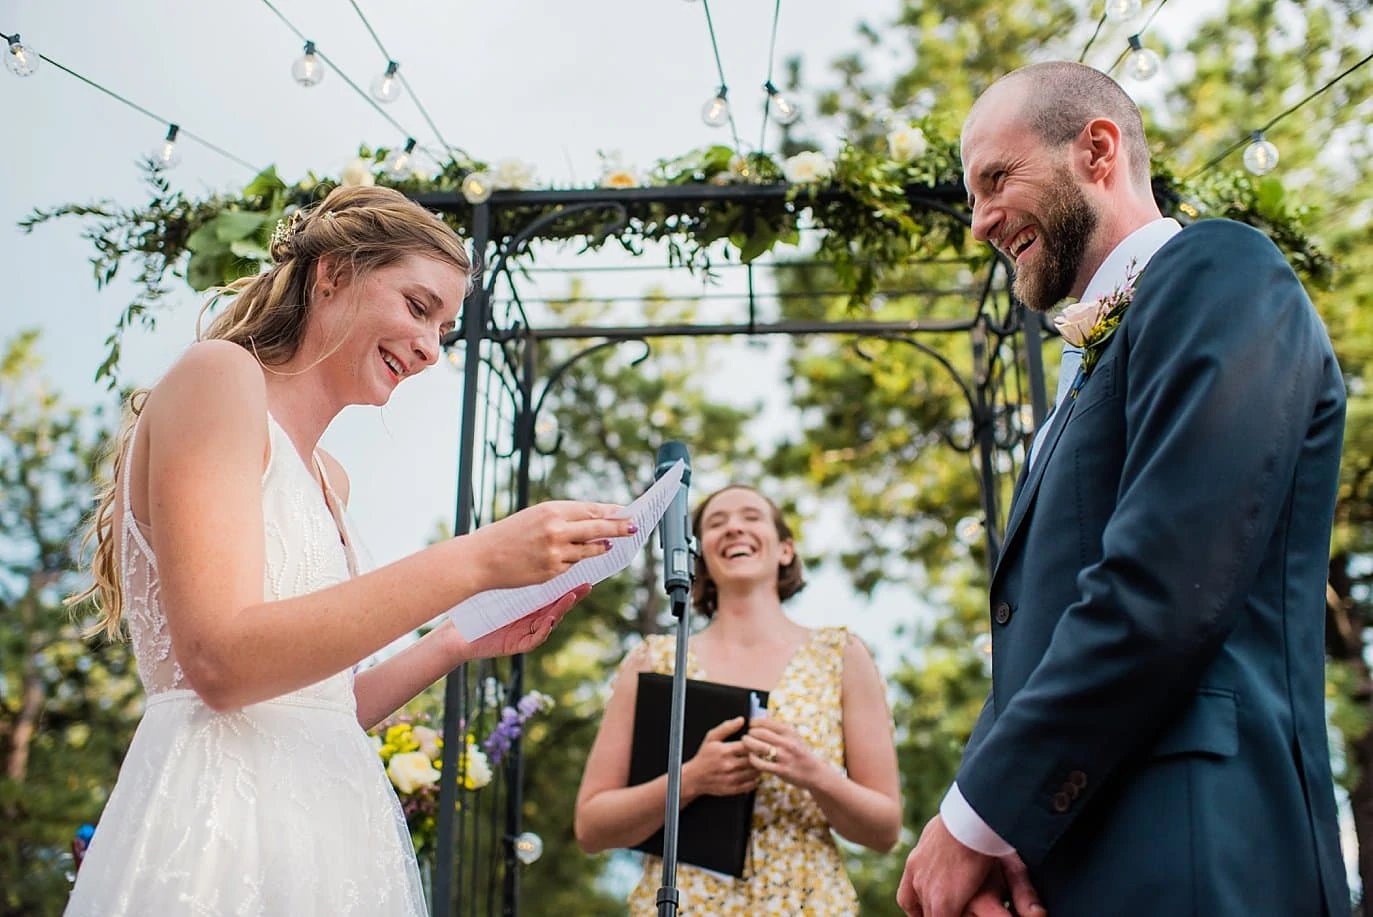 emotional vows on outdoor patio at romantic golden wedding by Evergreen Wedding photographer Jennie Crate